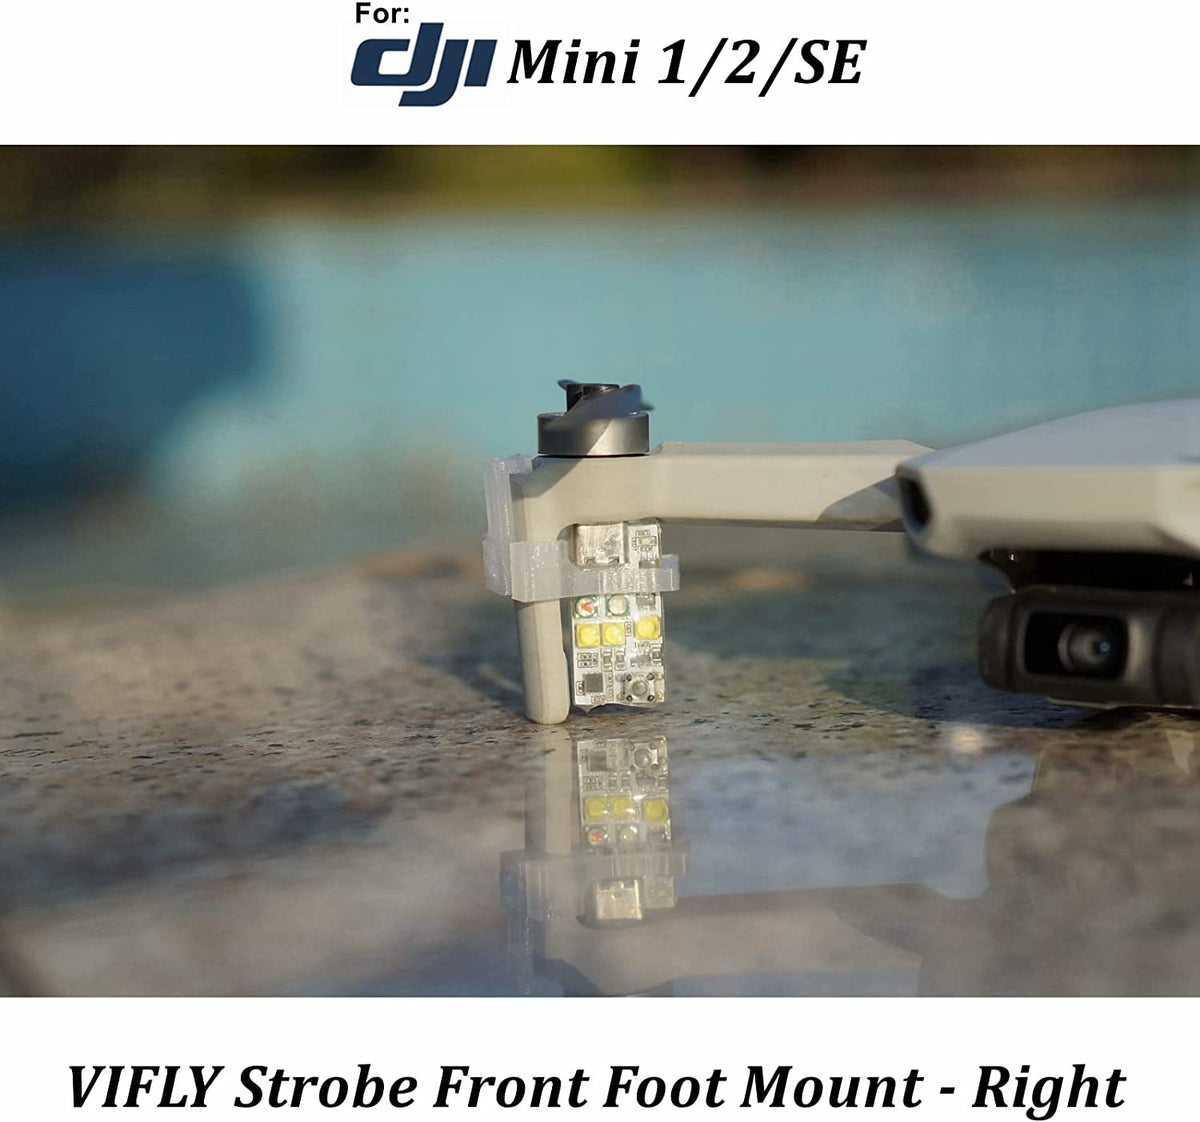 Anti-Collision Strobes for Drones at Night - VIFLY vs LUME CUBE 